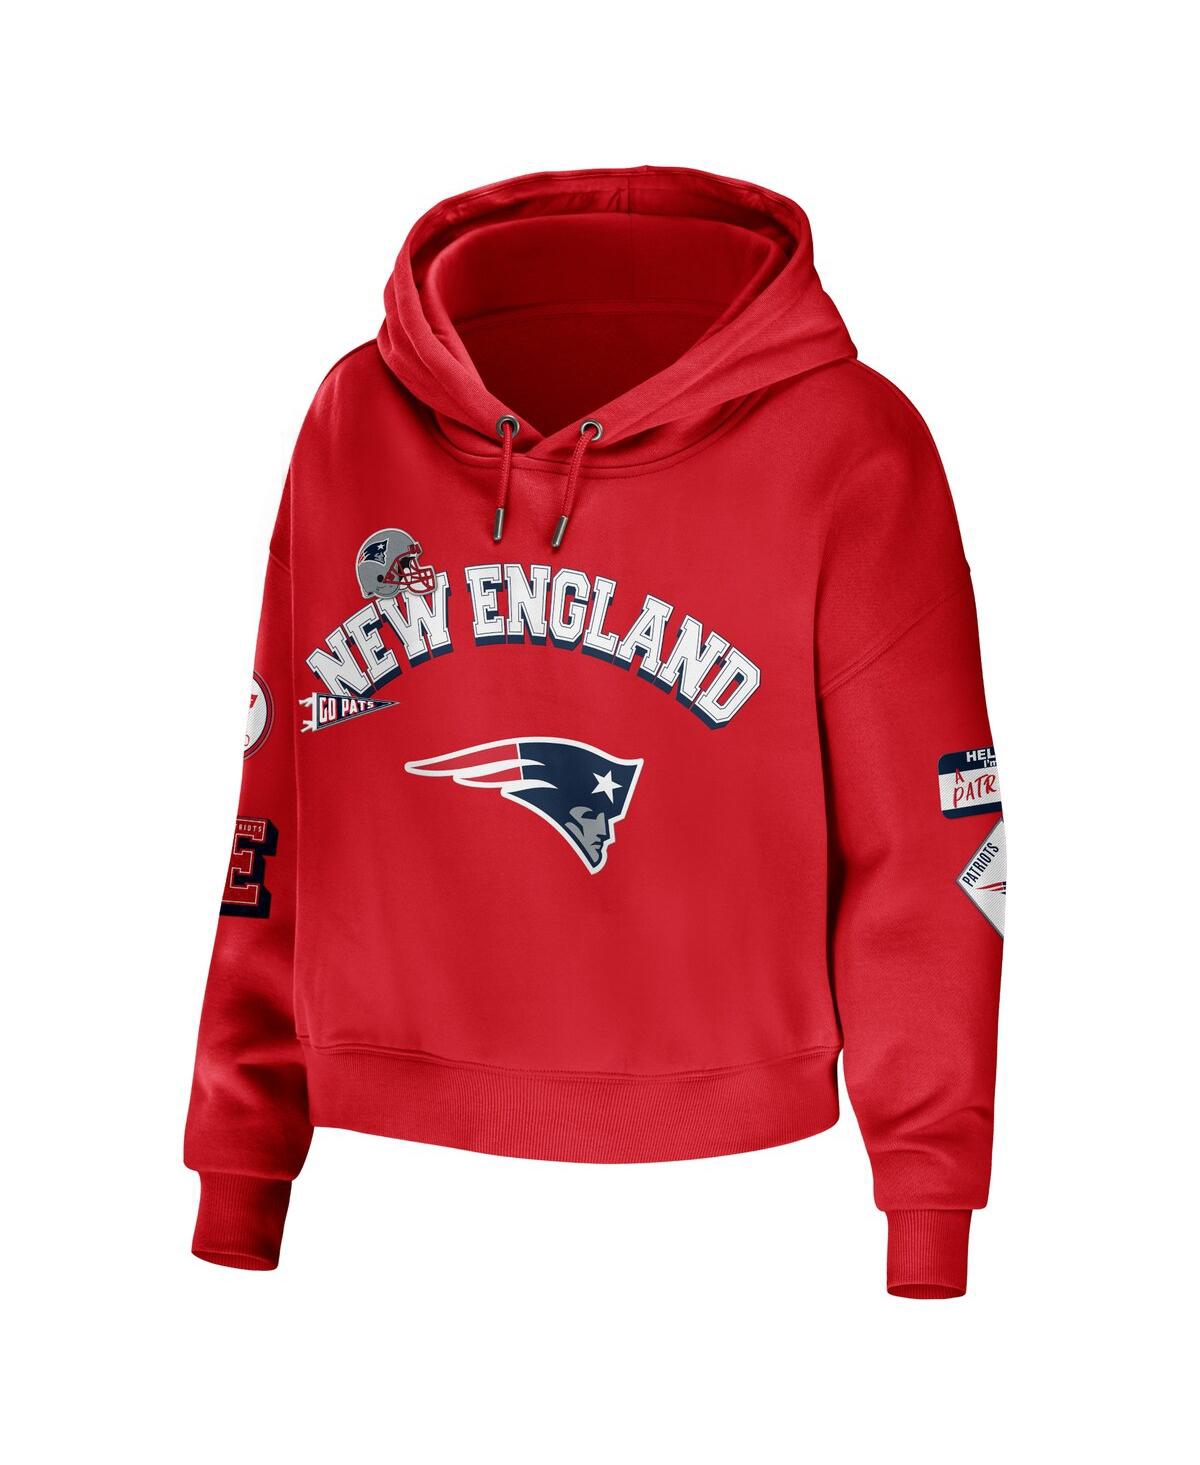 Shop Wear By Erin Andrews Women's  Red New England Patriots Modest Cropped Pullover Hoodie